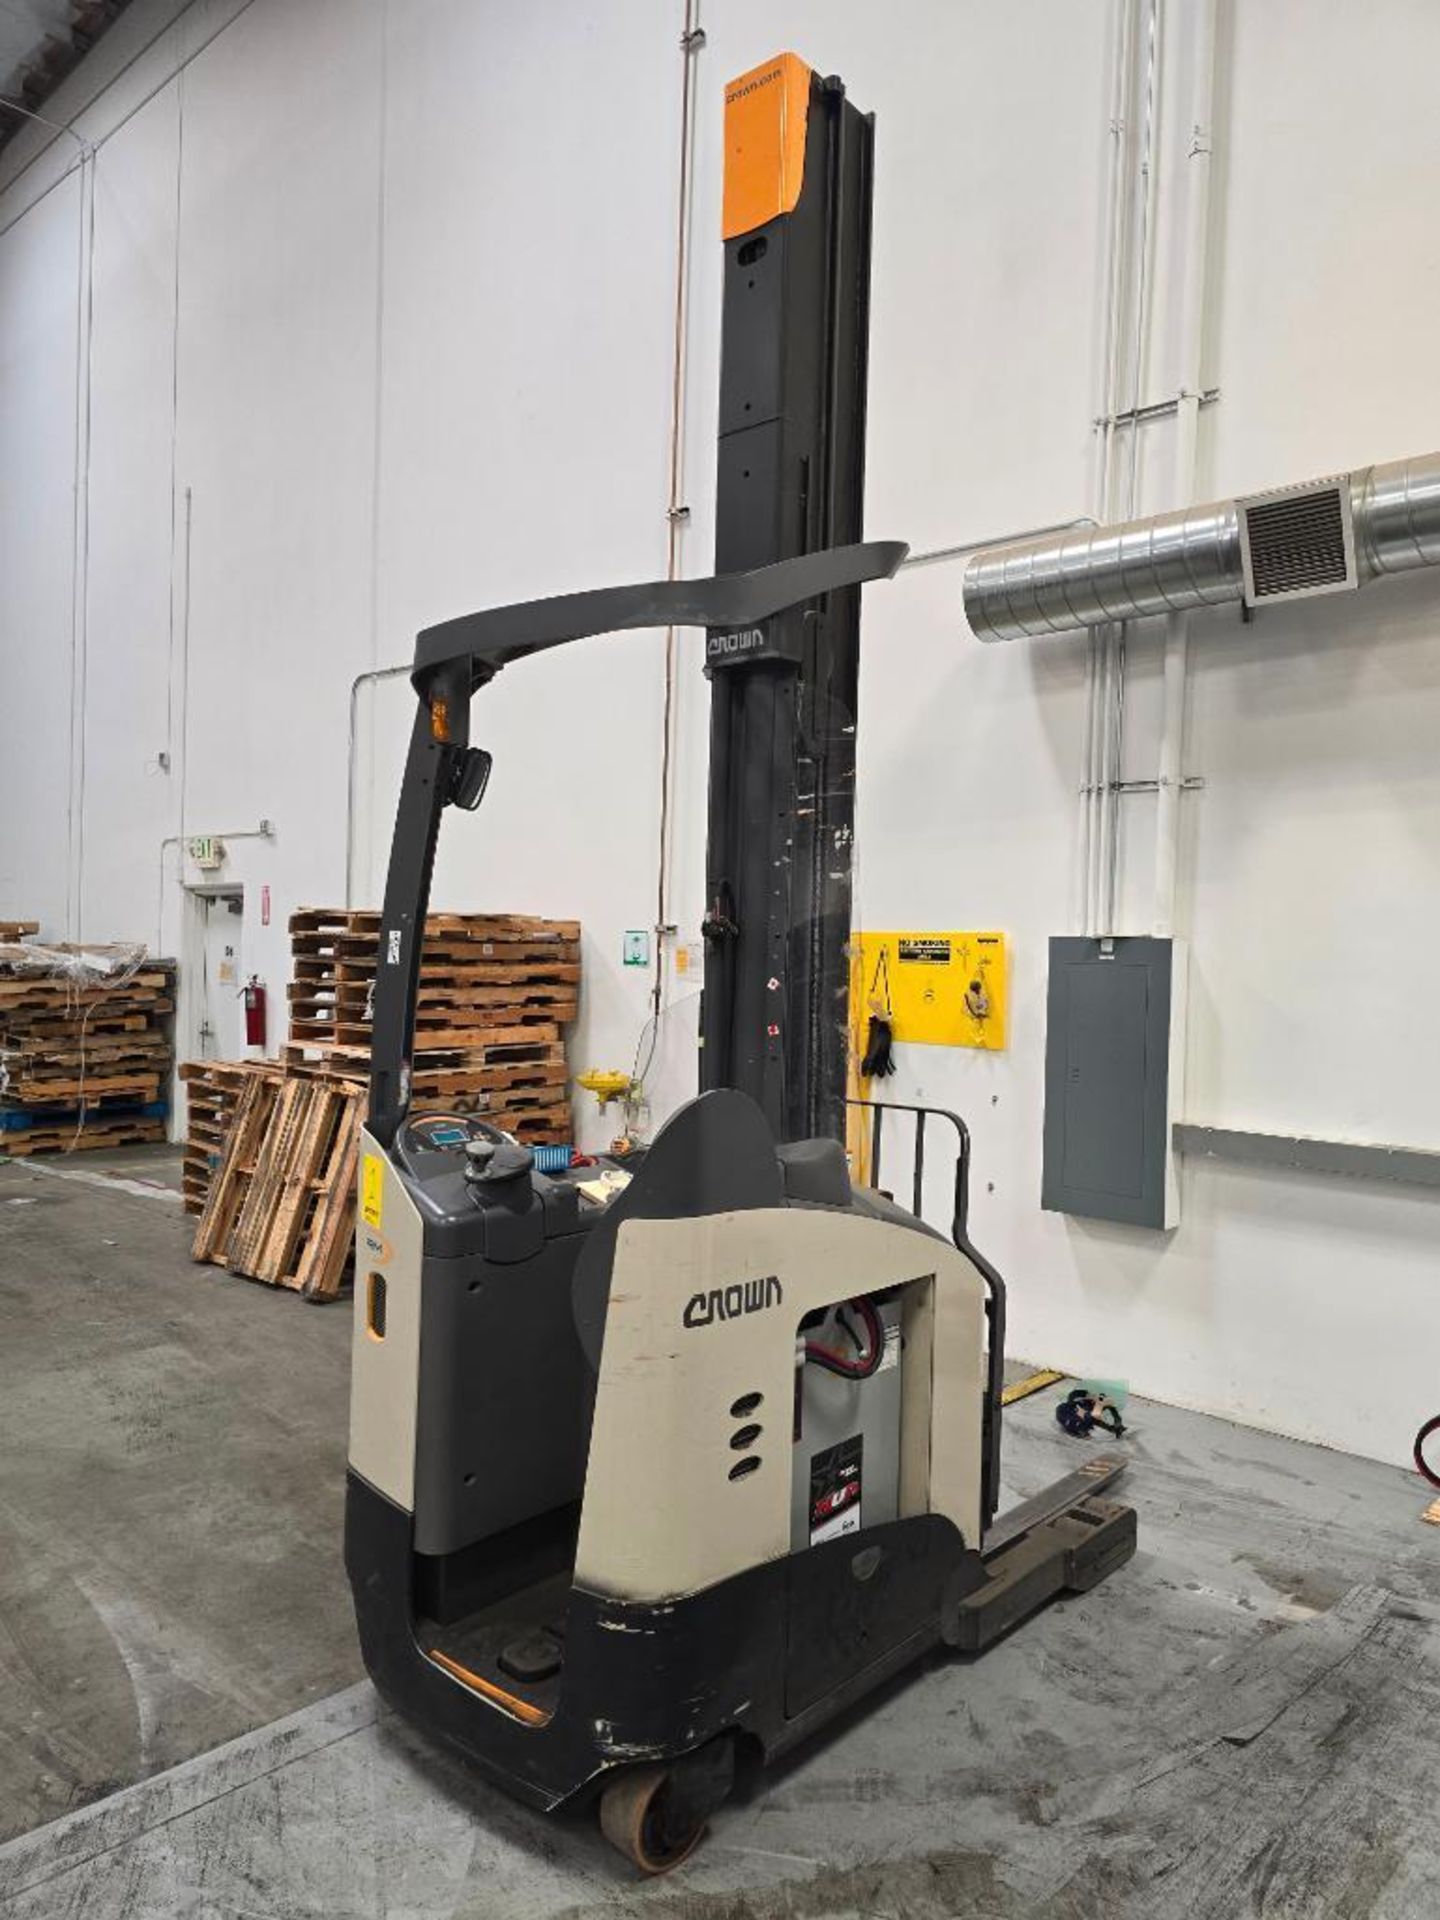 2017 Crown Monomast 4,500-LB. Capacity Reach Truck, Model: RM 6000 Series, 36-Volts, S/N: 1A486193, - Image 4 of 15